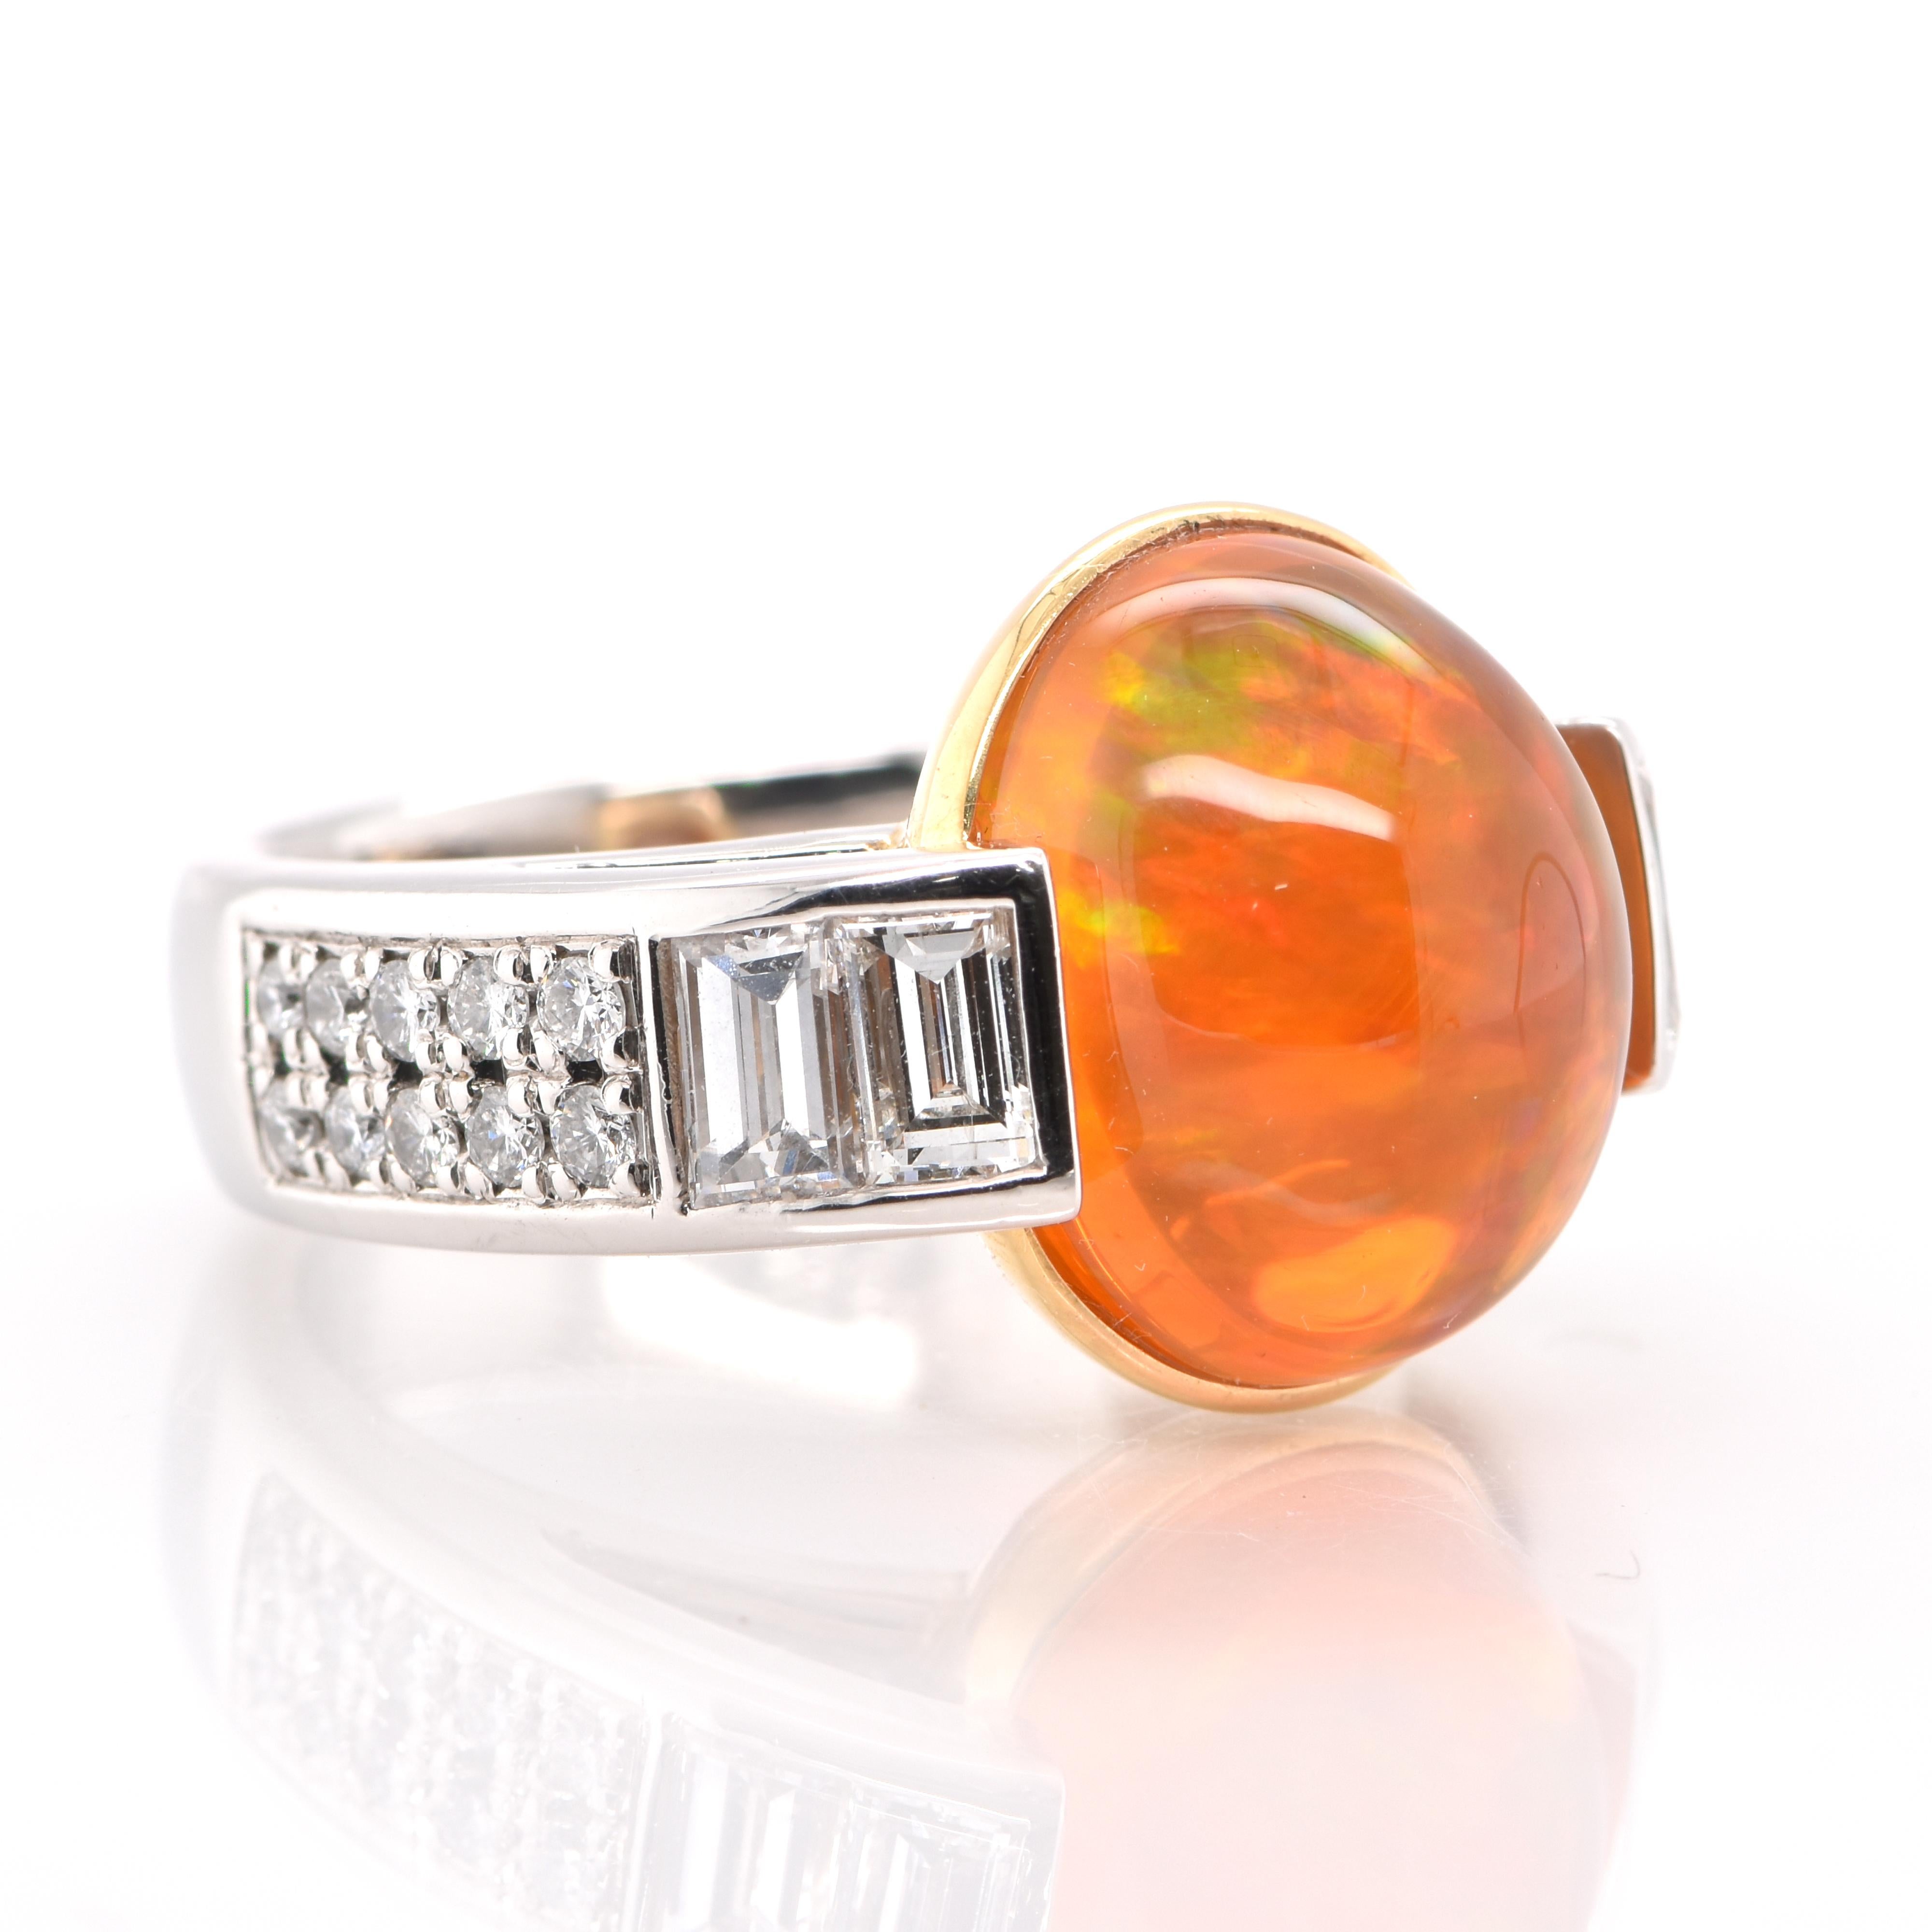 A beautiful Cocktail Ring featuring a 9.03 Carat, Natural Mexican Fire Opal with very good play of color and 1.20 Carats of Diamond Accents set in both Platinum and 18K Yellow Gold. Opals are known for exhibiting flashes of rainbow colors known as